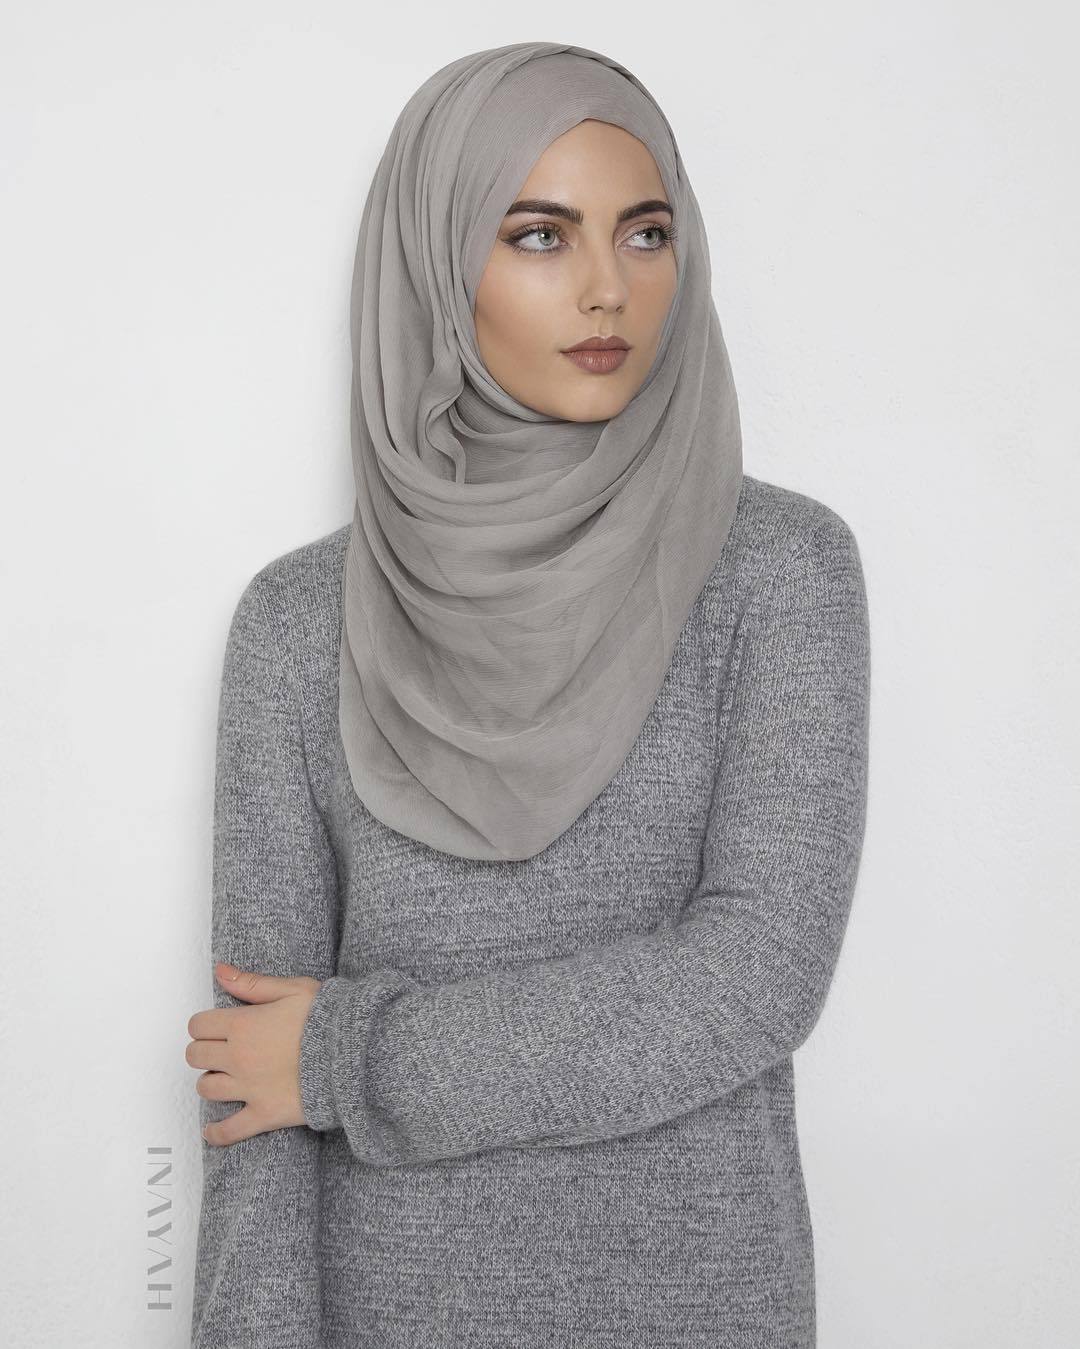 islamic-fashion-inayah:

The Light Grey Long Jumper, now also available in Black and petite sizes, is a great pairing with our Feather Grey Maxi Silk Chiffon Hijab. Shop now as our Long Jumpers are now on sale! 

Light Grey Long Jumper 
Feather Grey Maxi Silk Chiffon Hijab 

www.inayah.co


Beautiful hijab fashions.